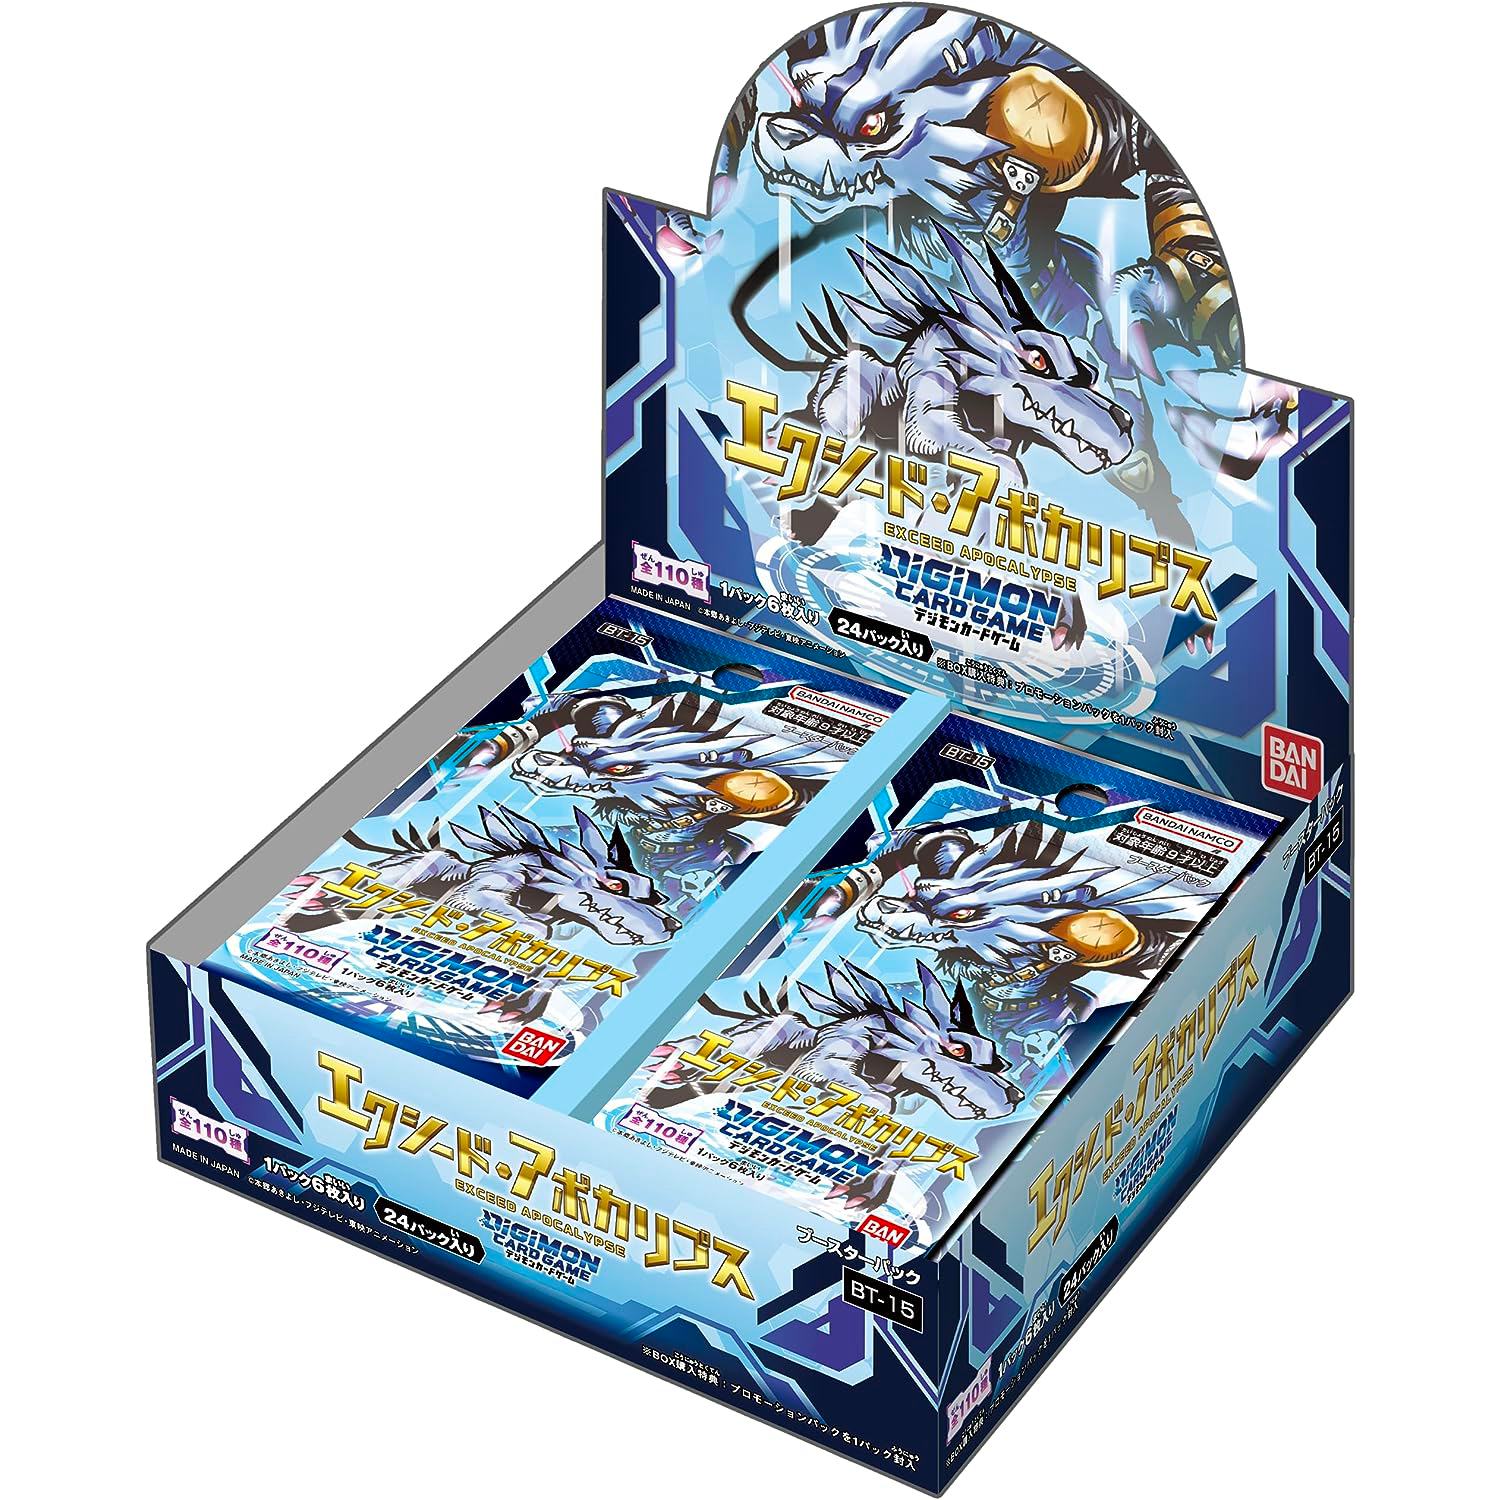 DIGIMON CARD GAME [BT-15] EXCEED APOCALYPSE - Box